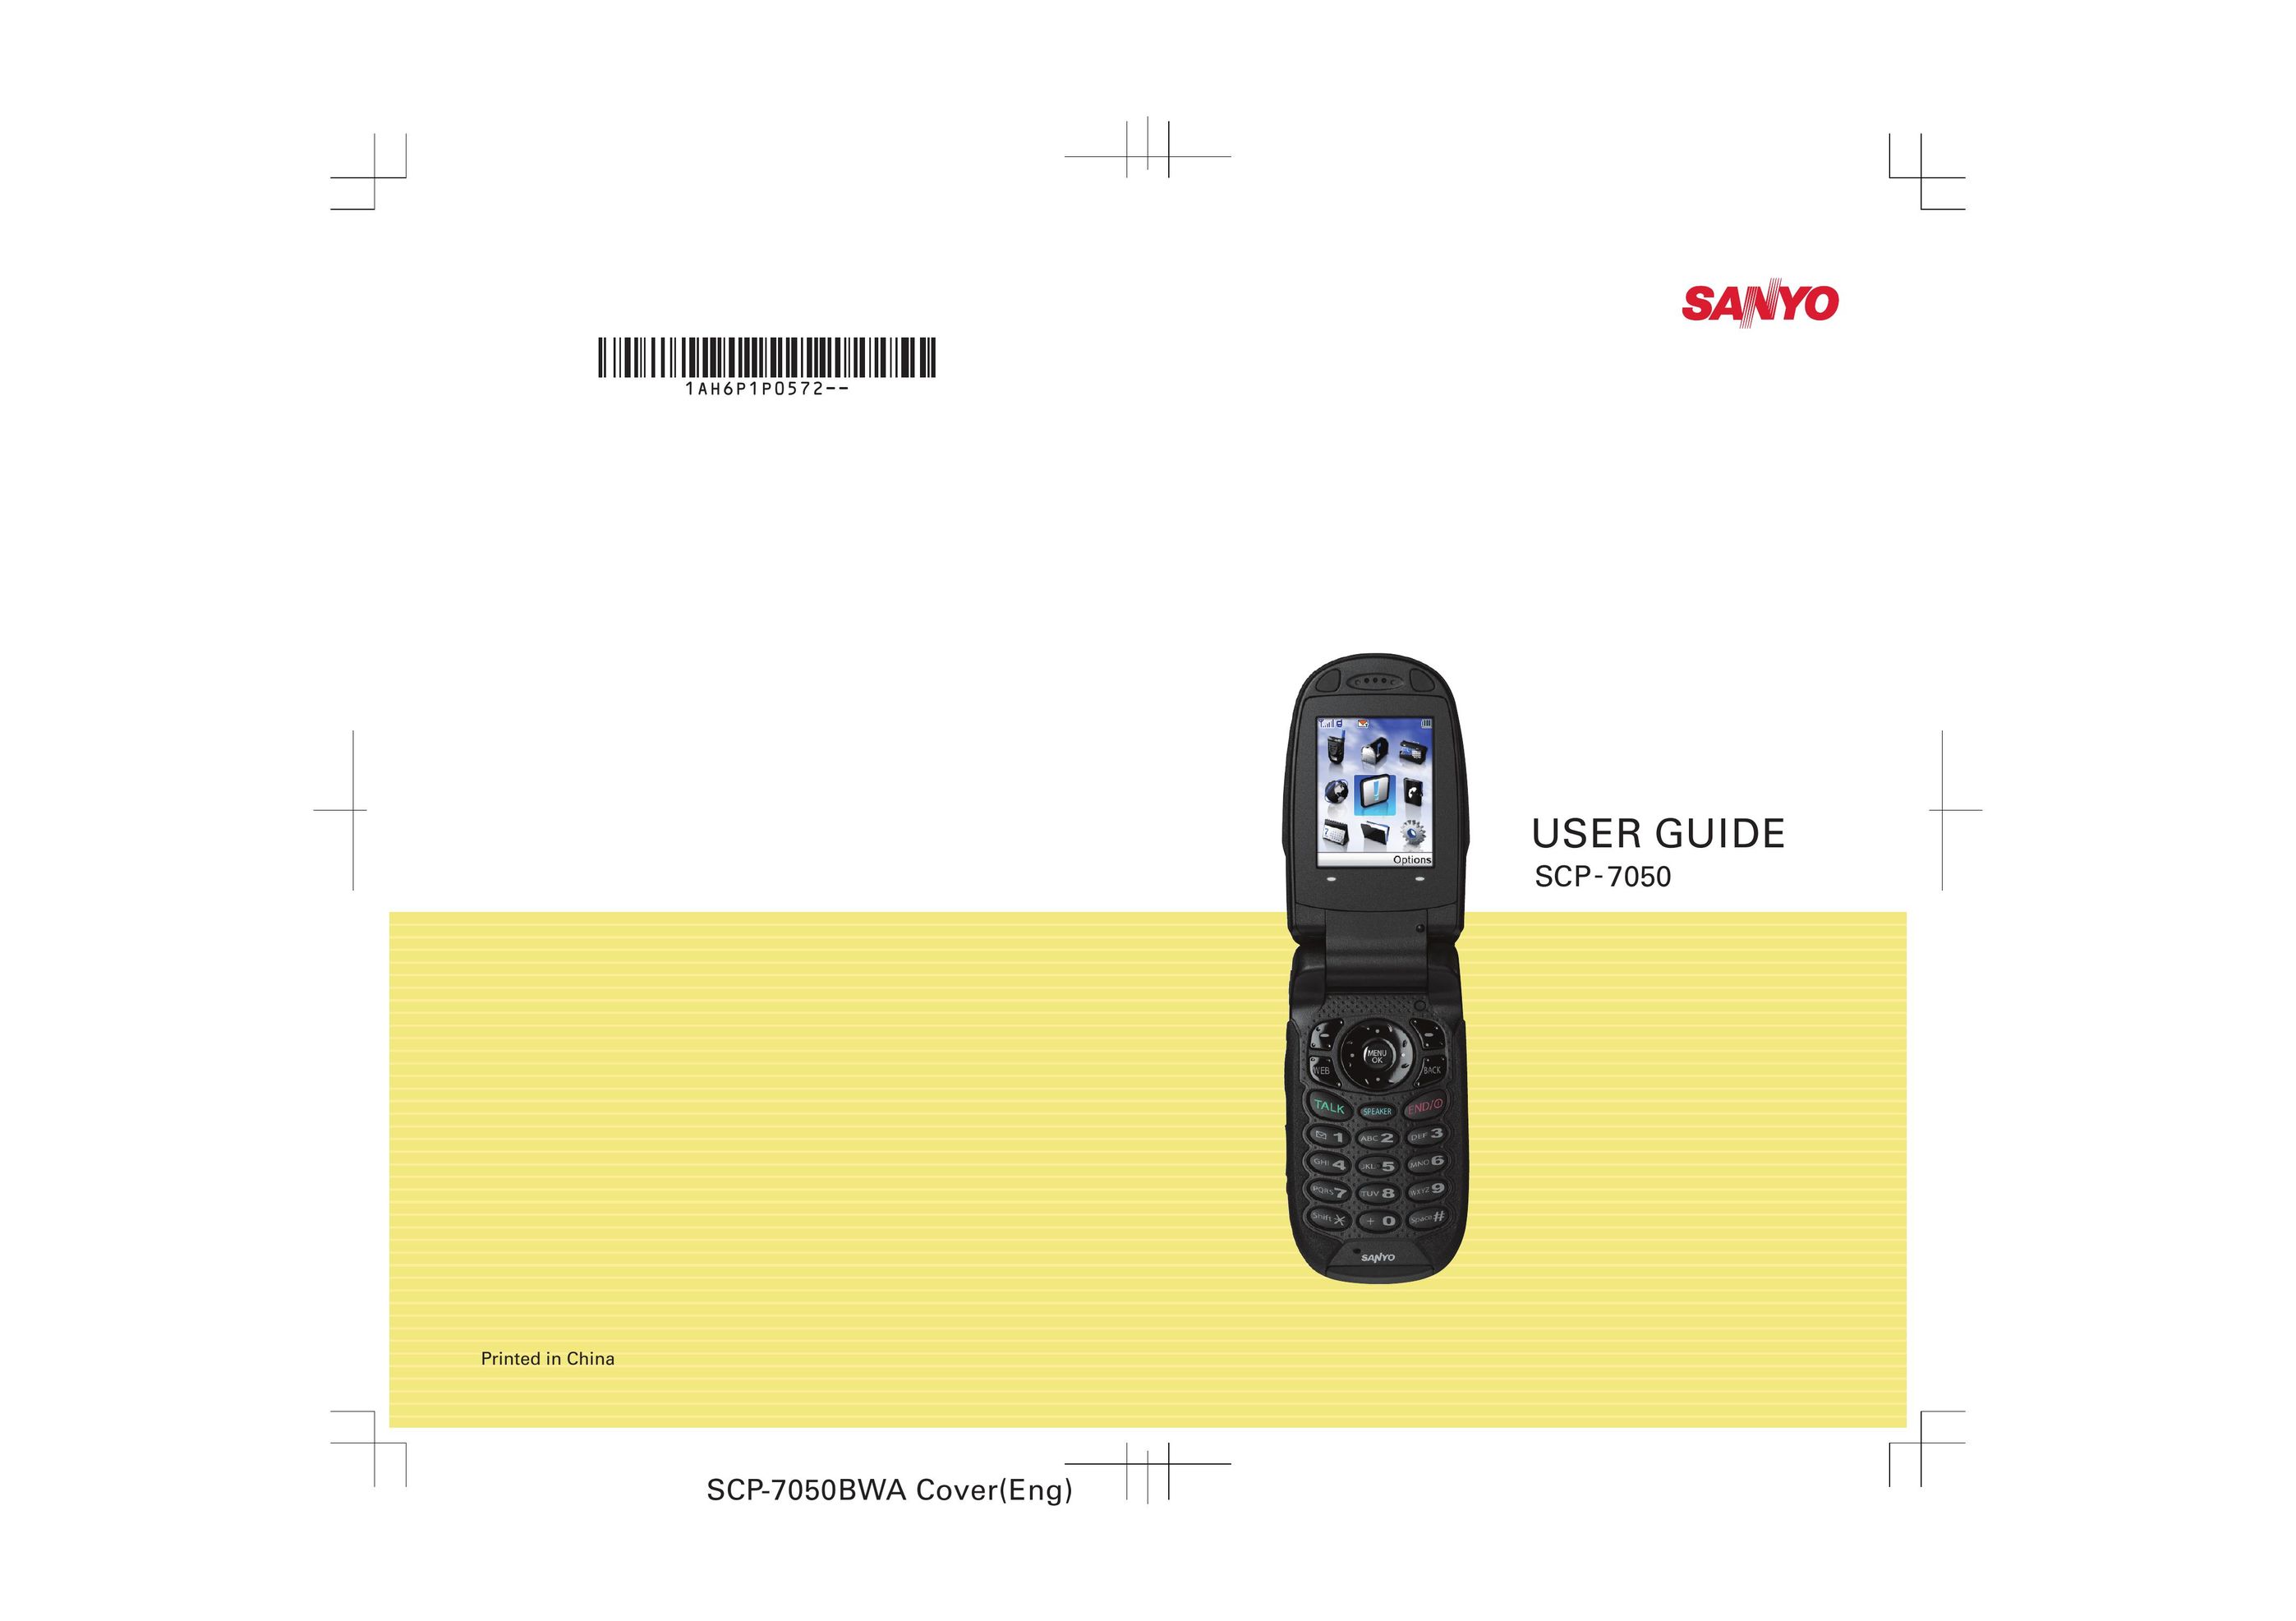 Sanyo SCP-7050 Cell Phone User Manual